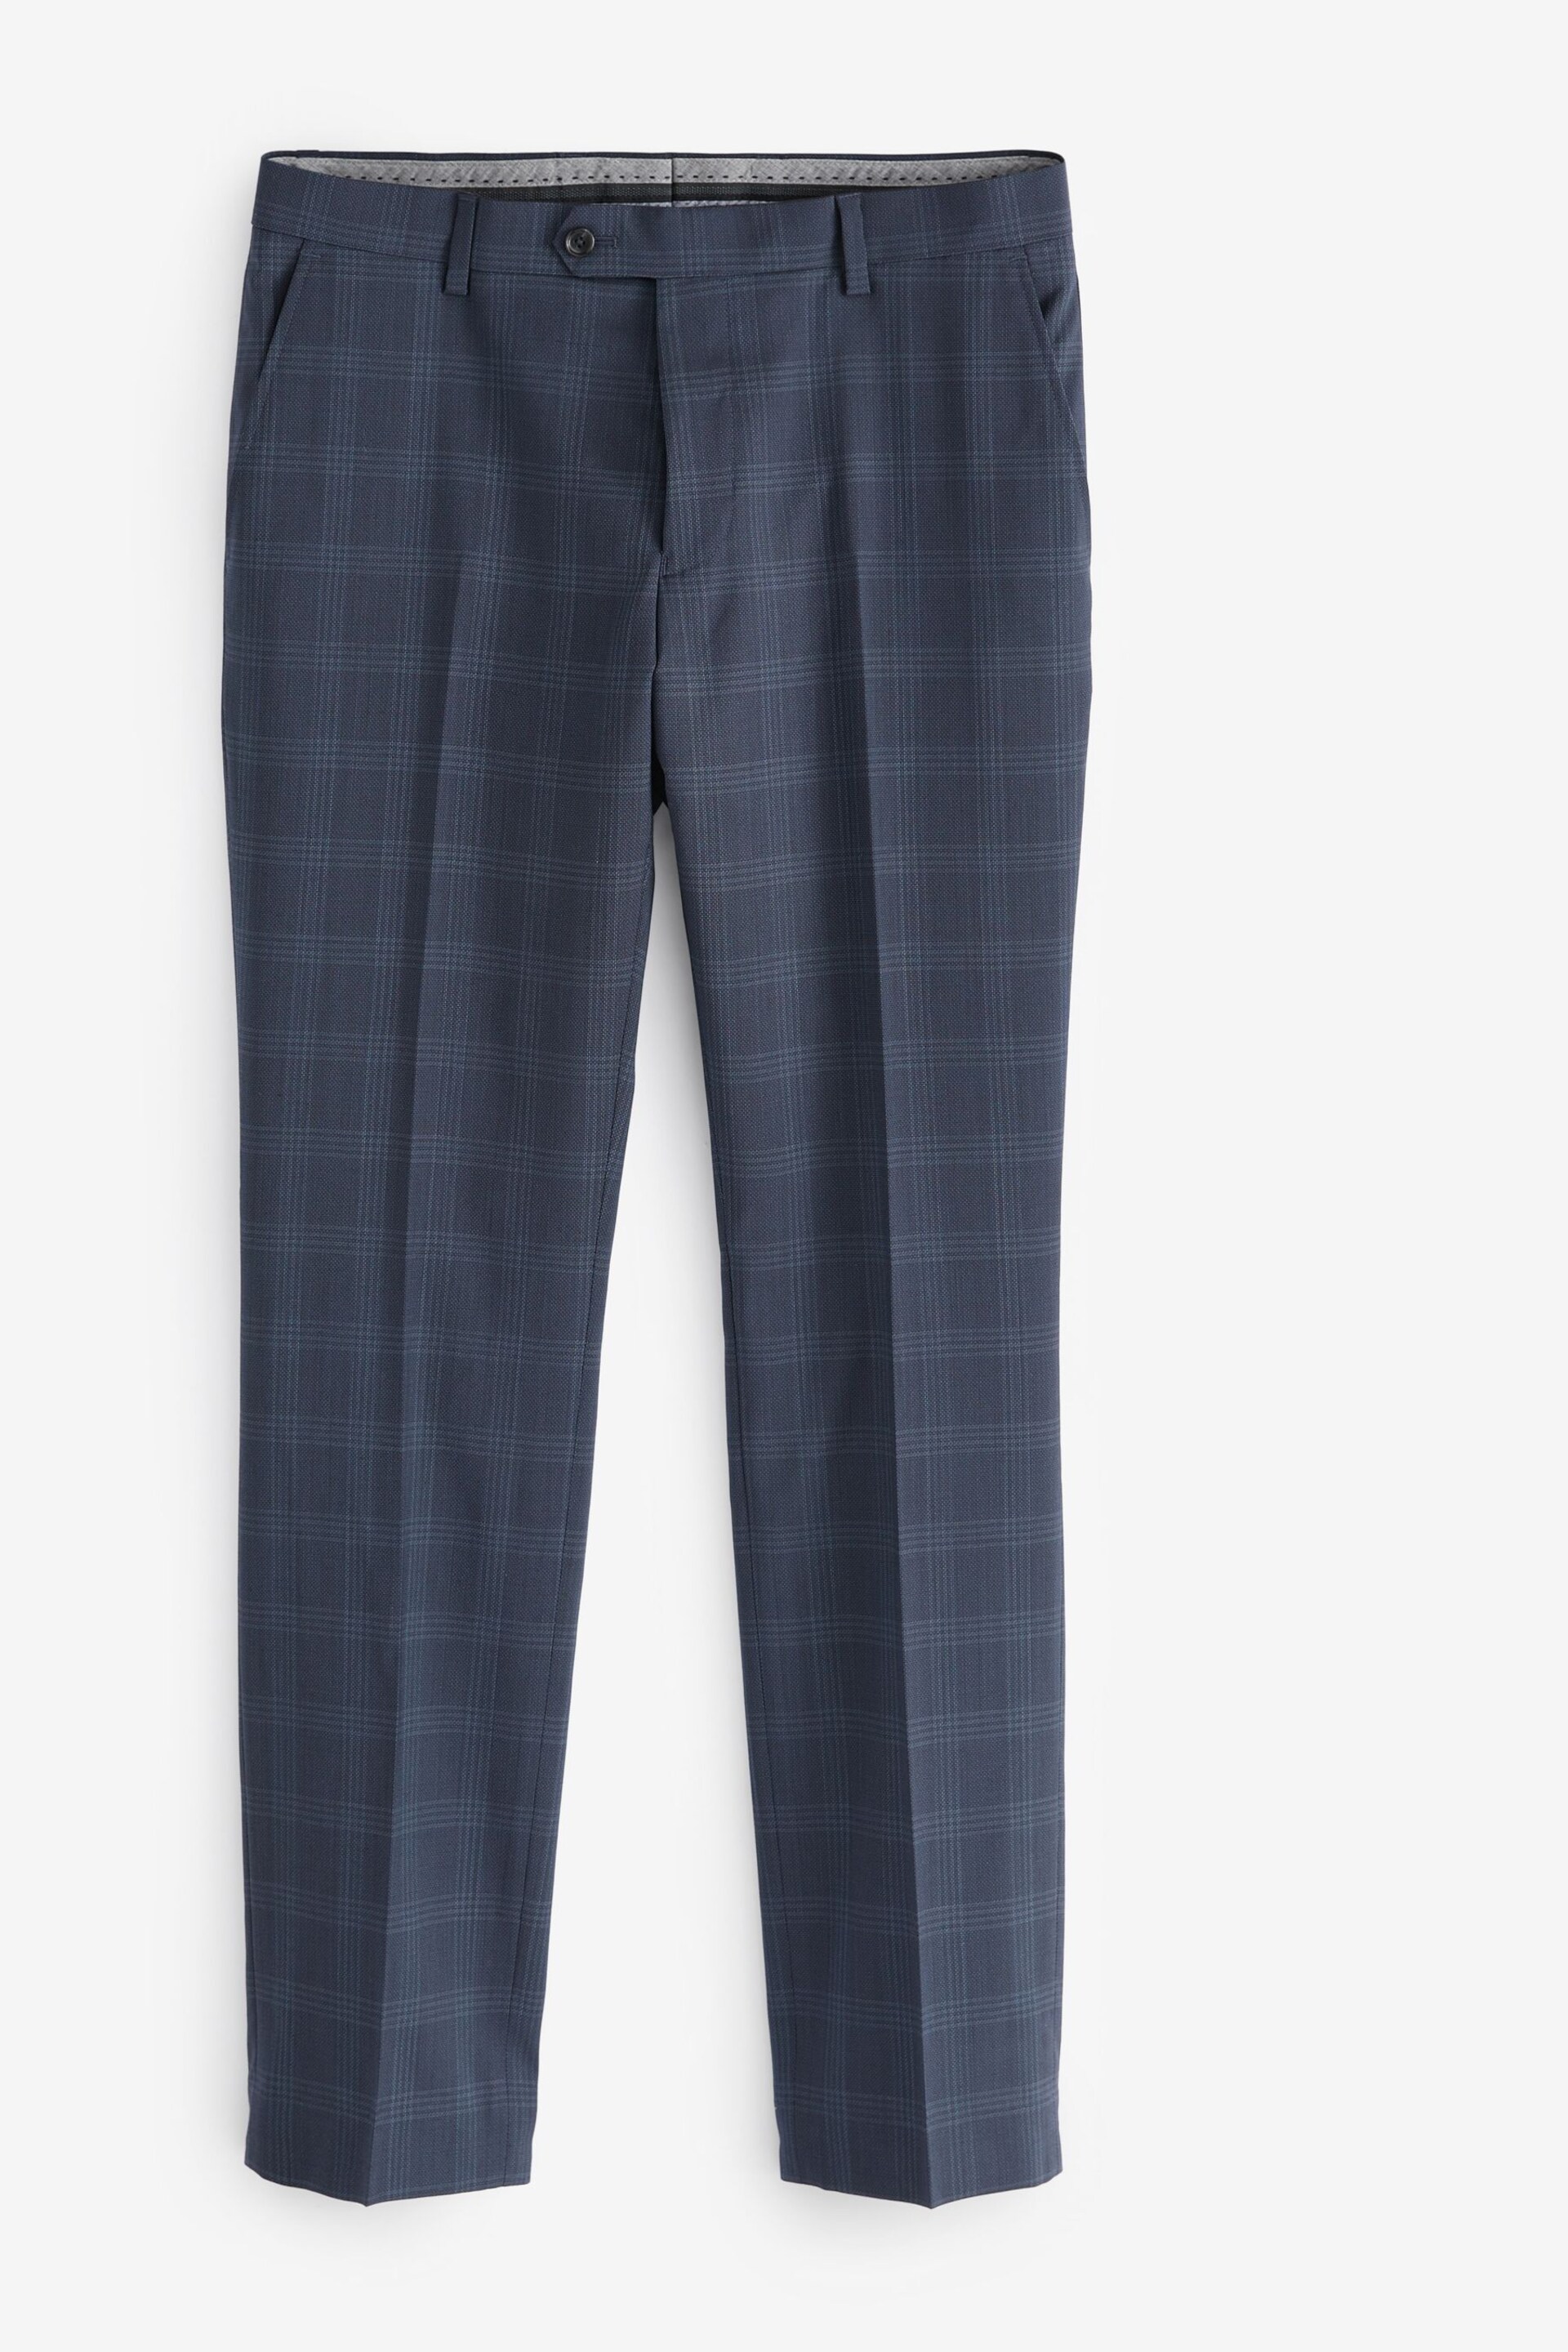 Navy Blue Slim Signature Italian Fabric Check Suit Trousers - Image 6 of 9